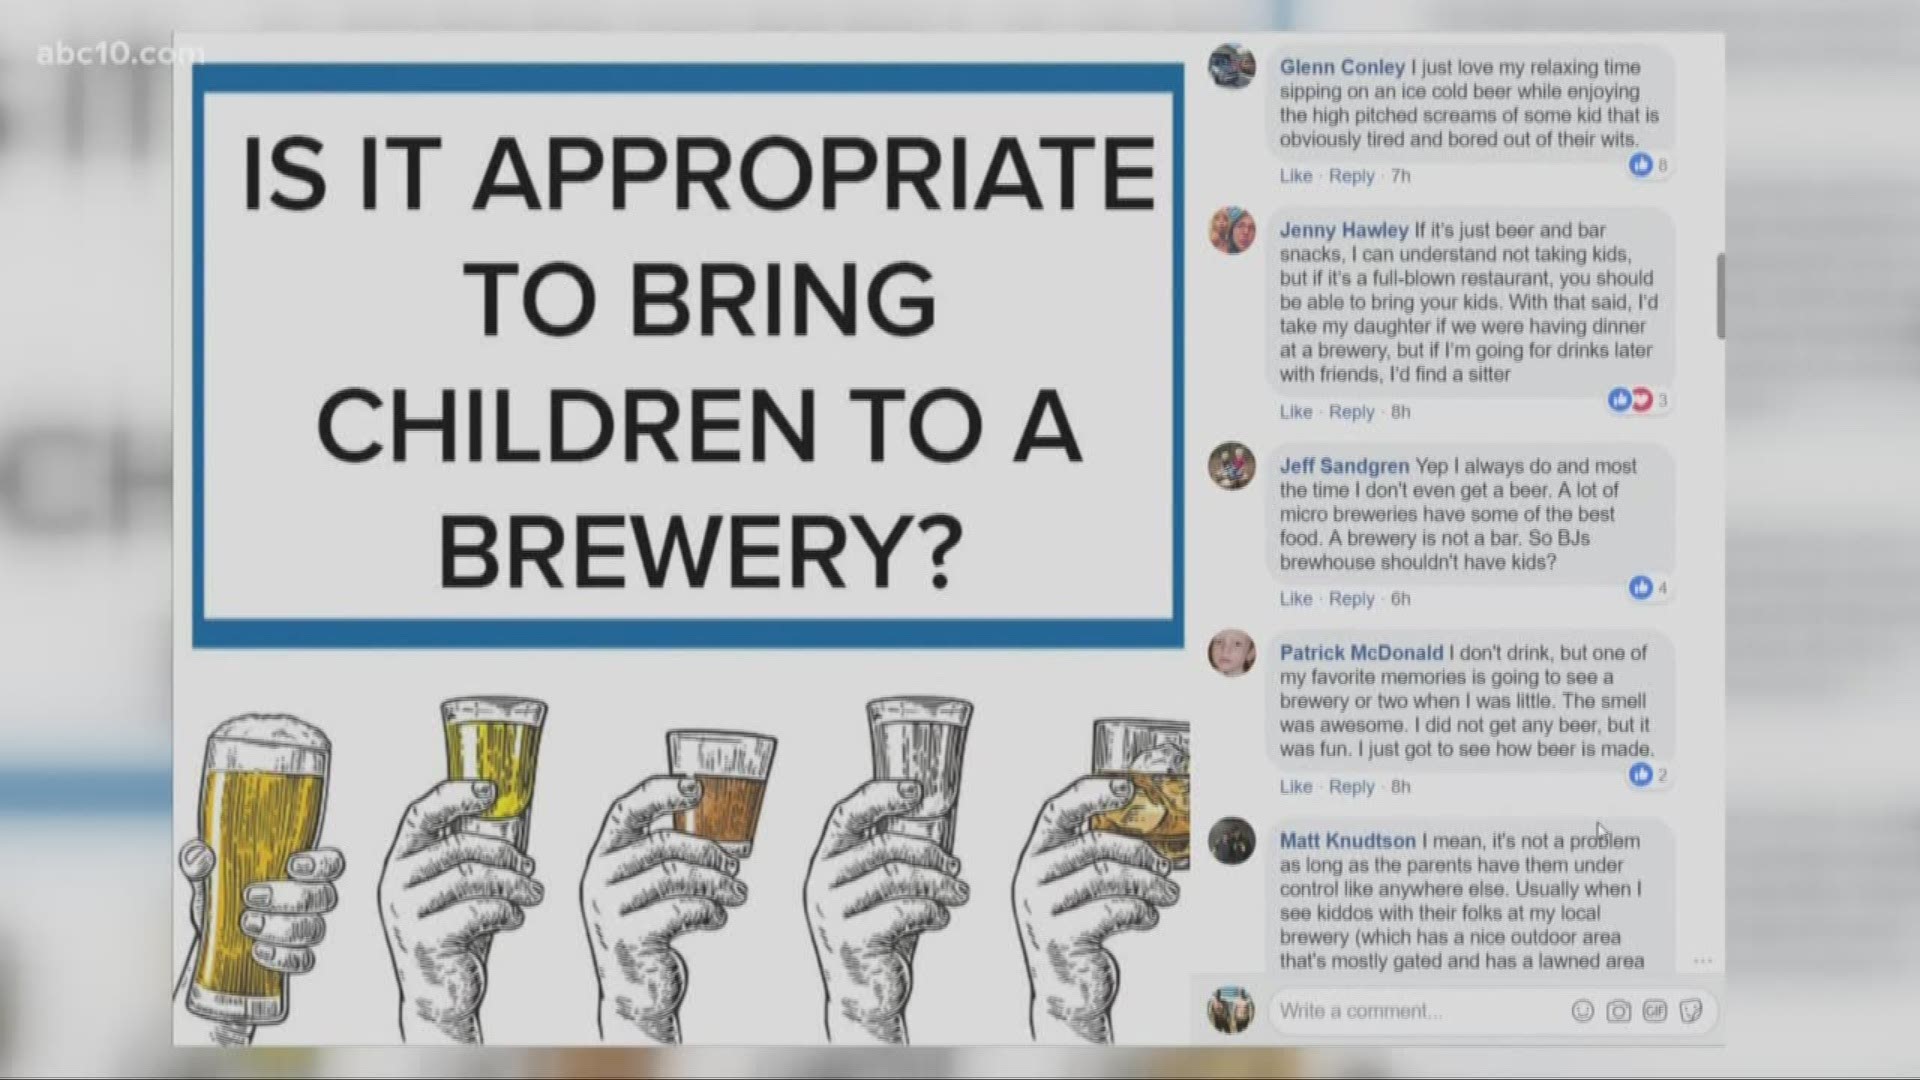 Have you noticed more children at local breweries? The question has a lot of people taking online.